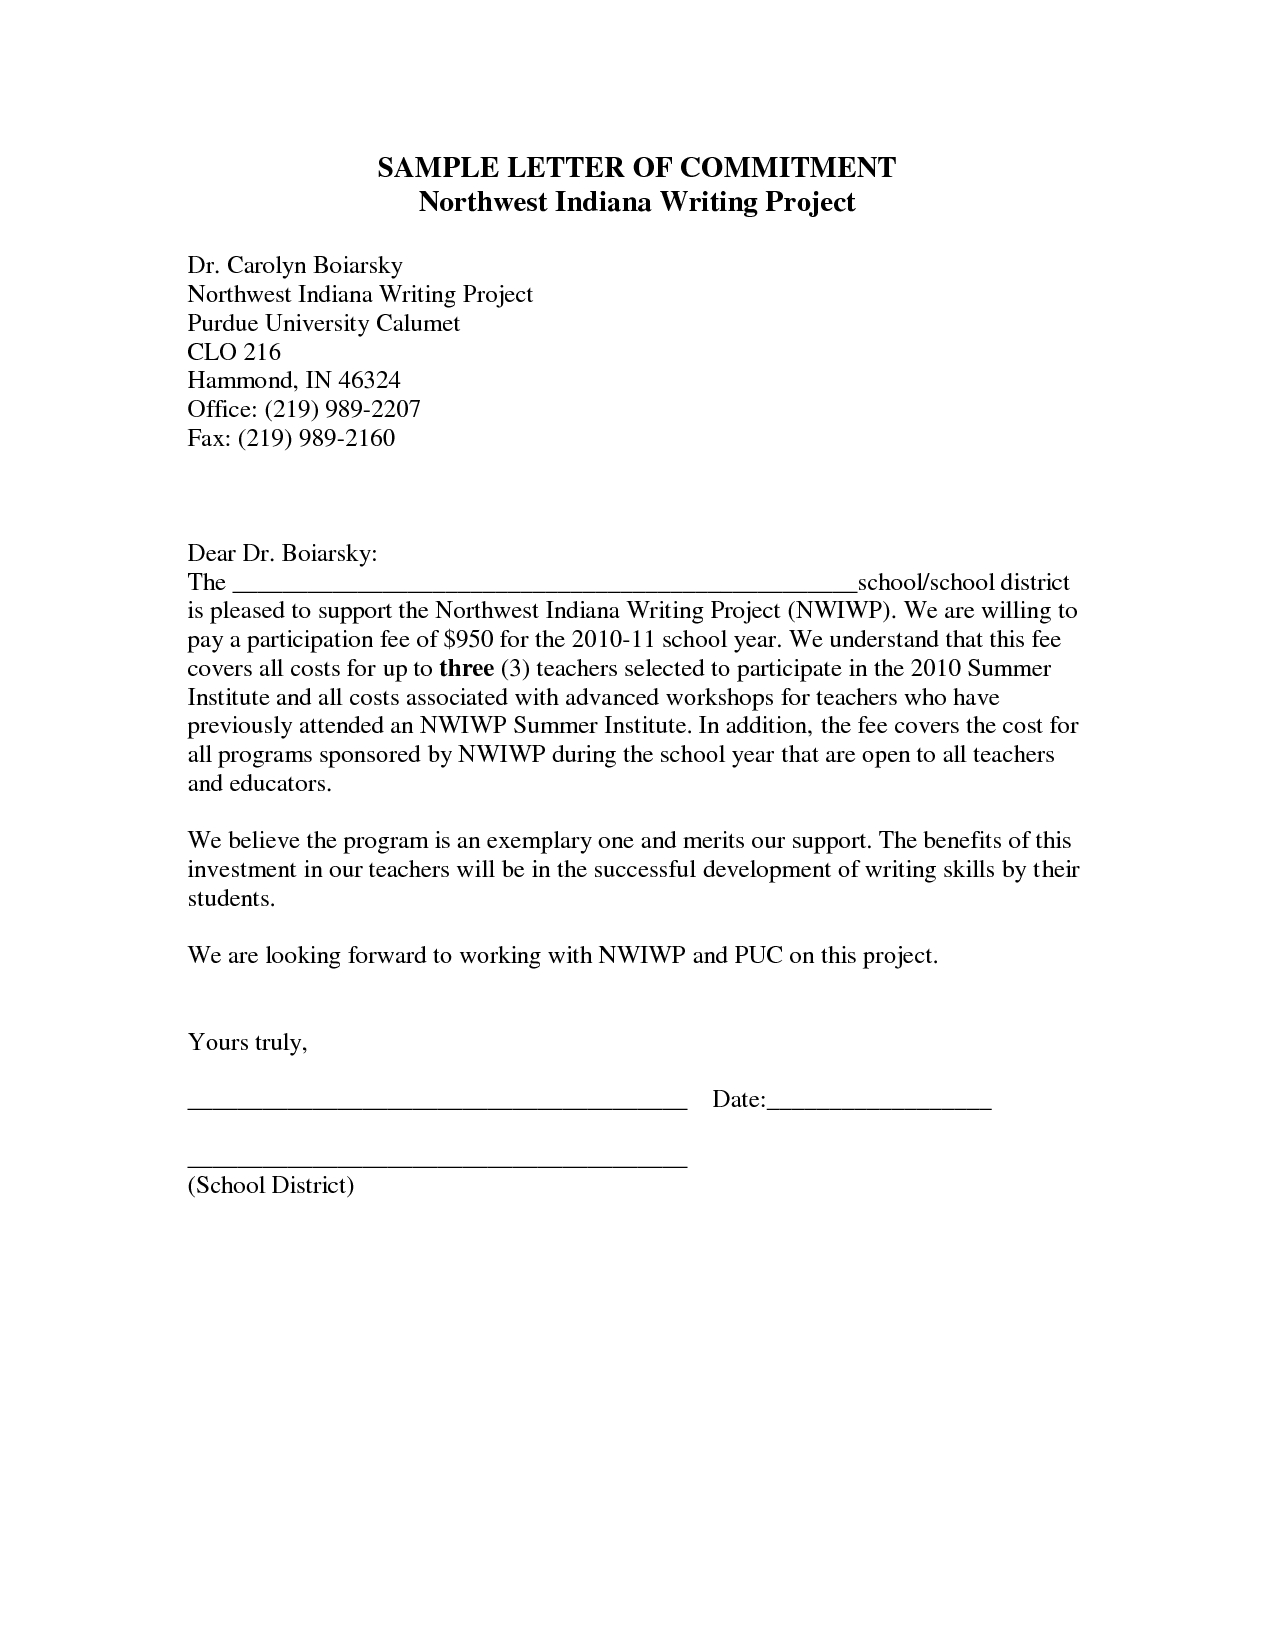 22 Images Of Student Program Commitment Agreement Template With Regard To Letter Of Commitment Template